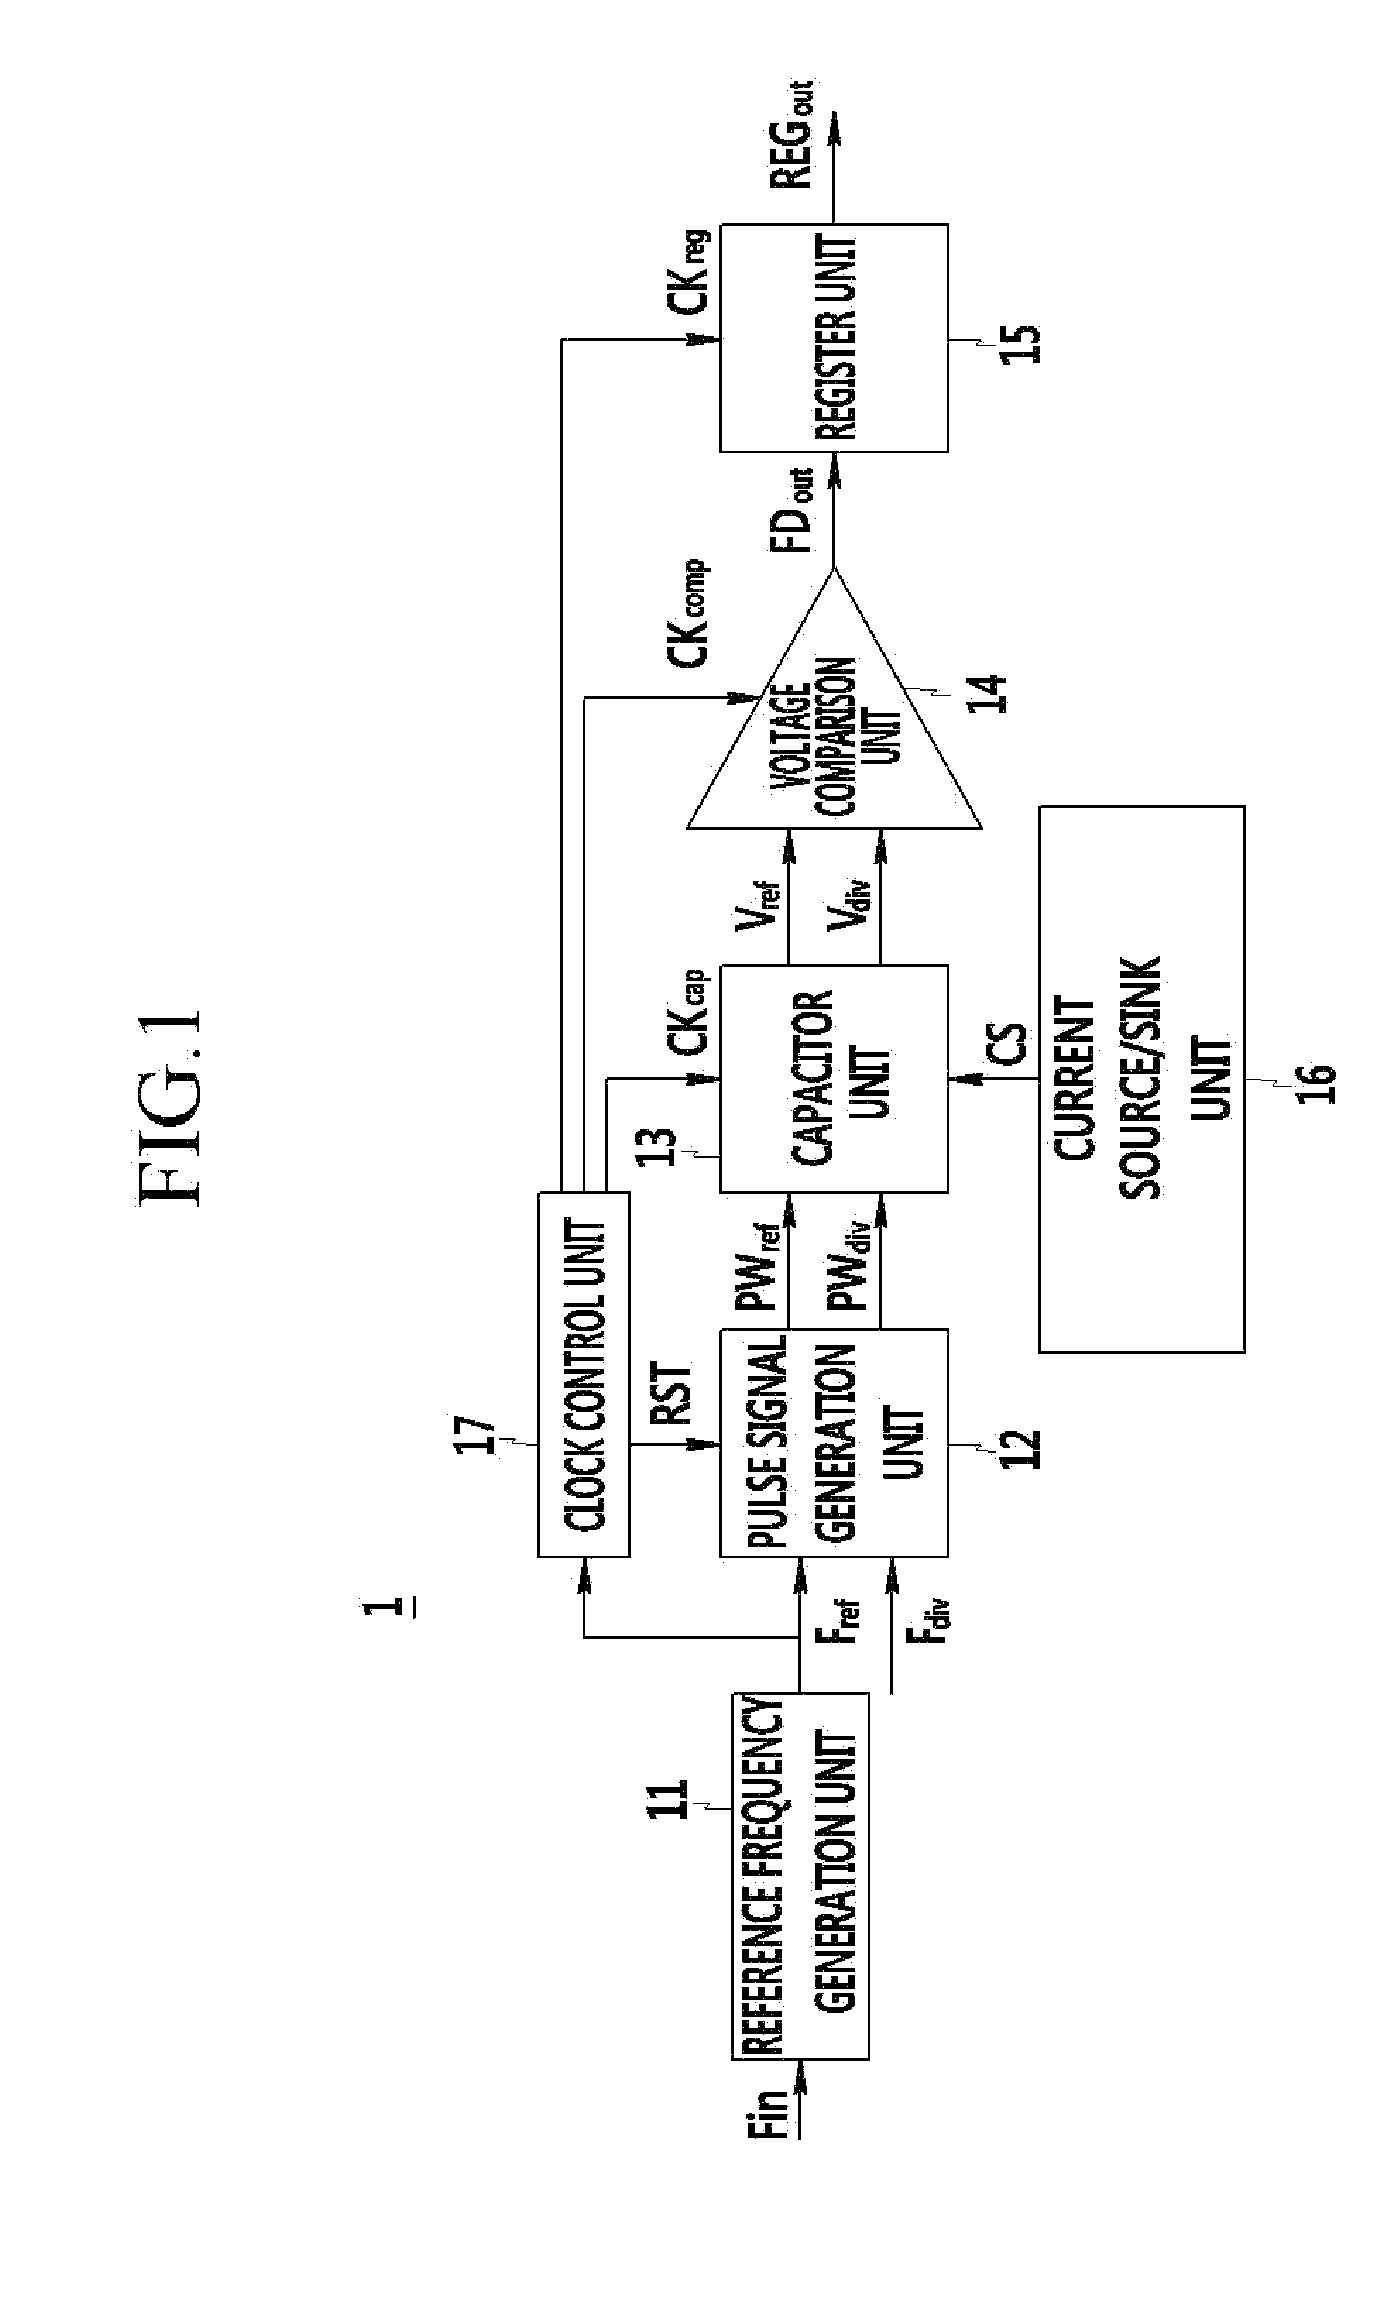 Fast wideband frequency comparator